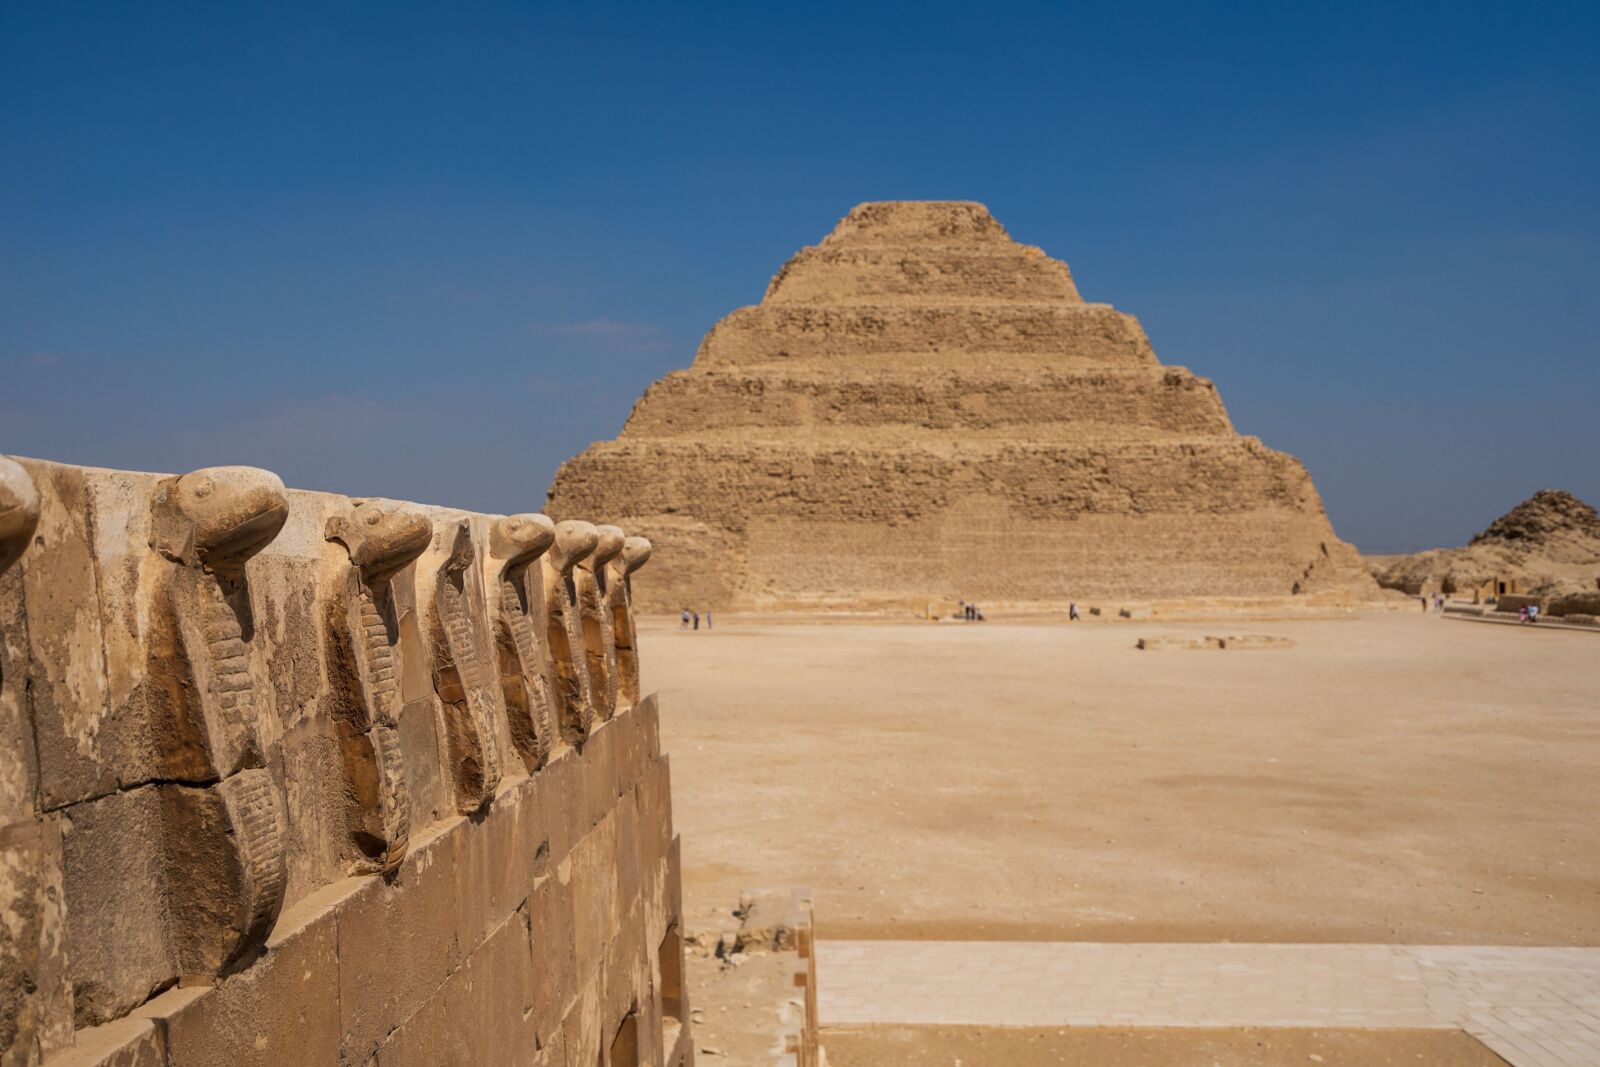 Saqqara is one of the bes things to do in egypt. shown here is large tomb